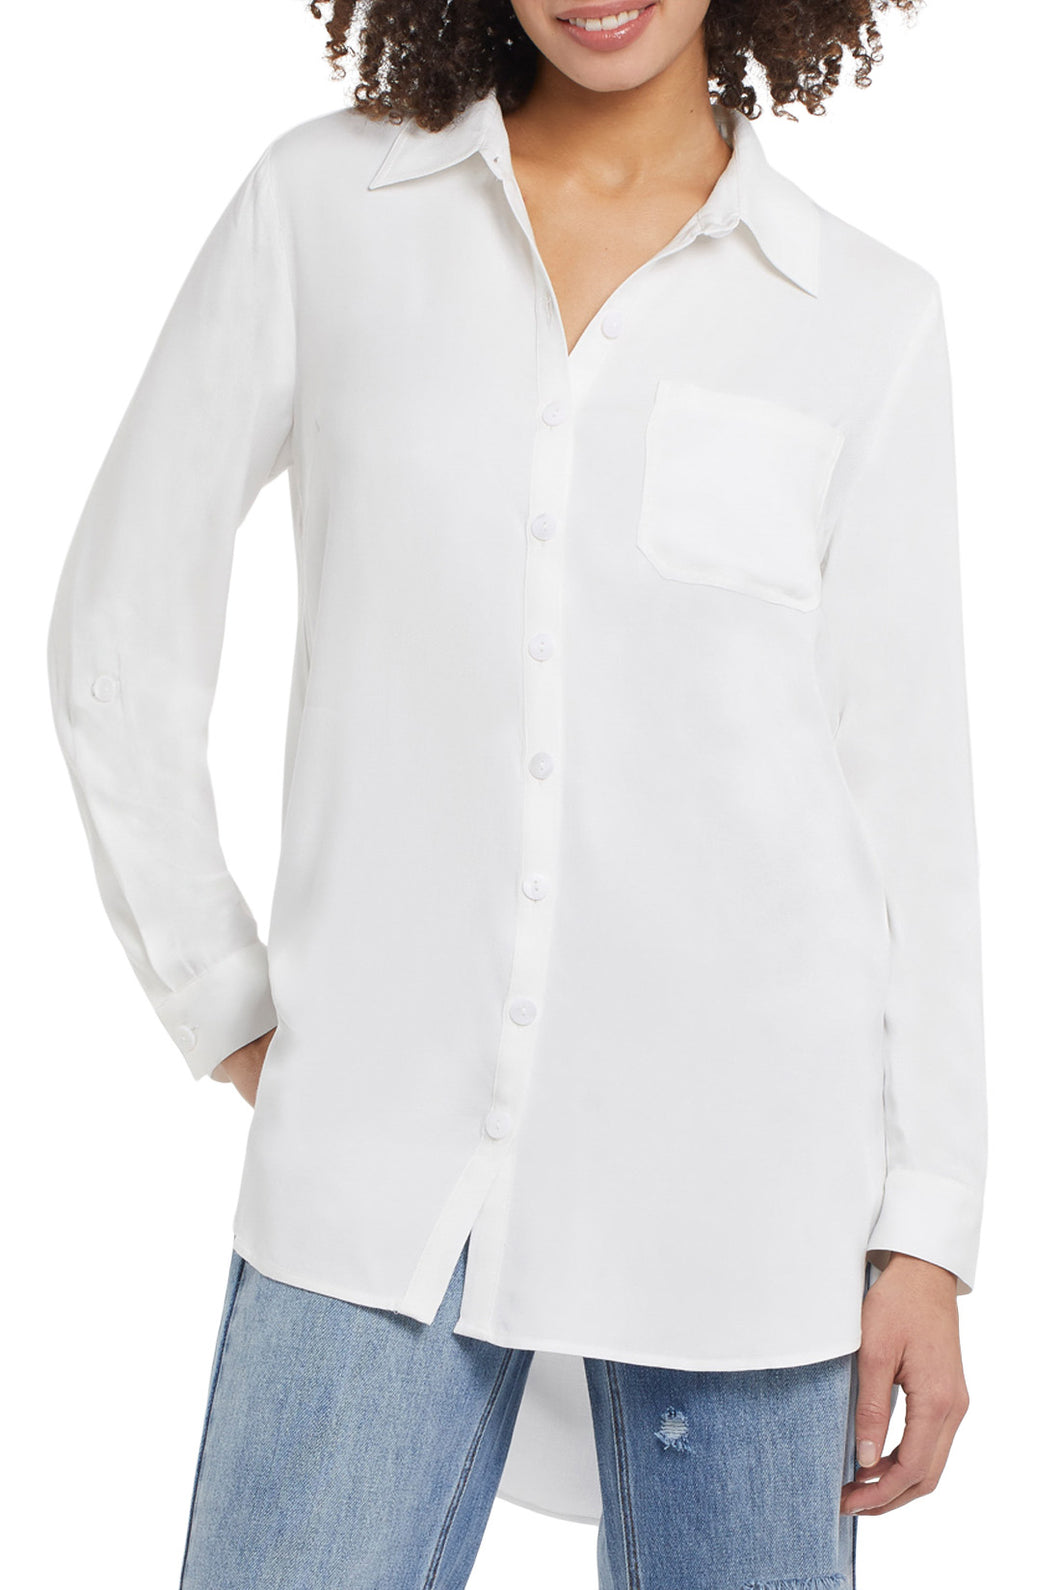 There's nothing better than a flowy tunic top to elevate any outfit! This flowy white button up shirt has all the classic details we love including a hidden button placket, roll-up tab cuffs, a chest patch pocket and curved shirttail hem on a high lo look.  Proudly wear on its own or put under a sweater vest, which is this season's hottest look! 